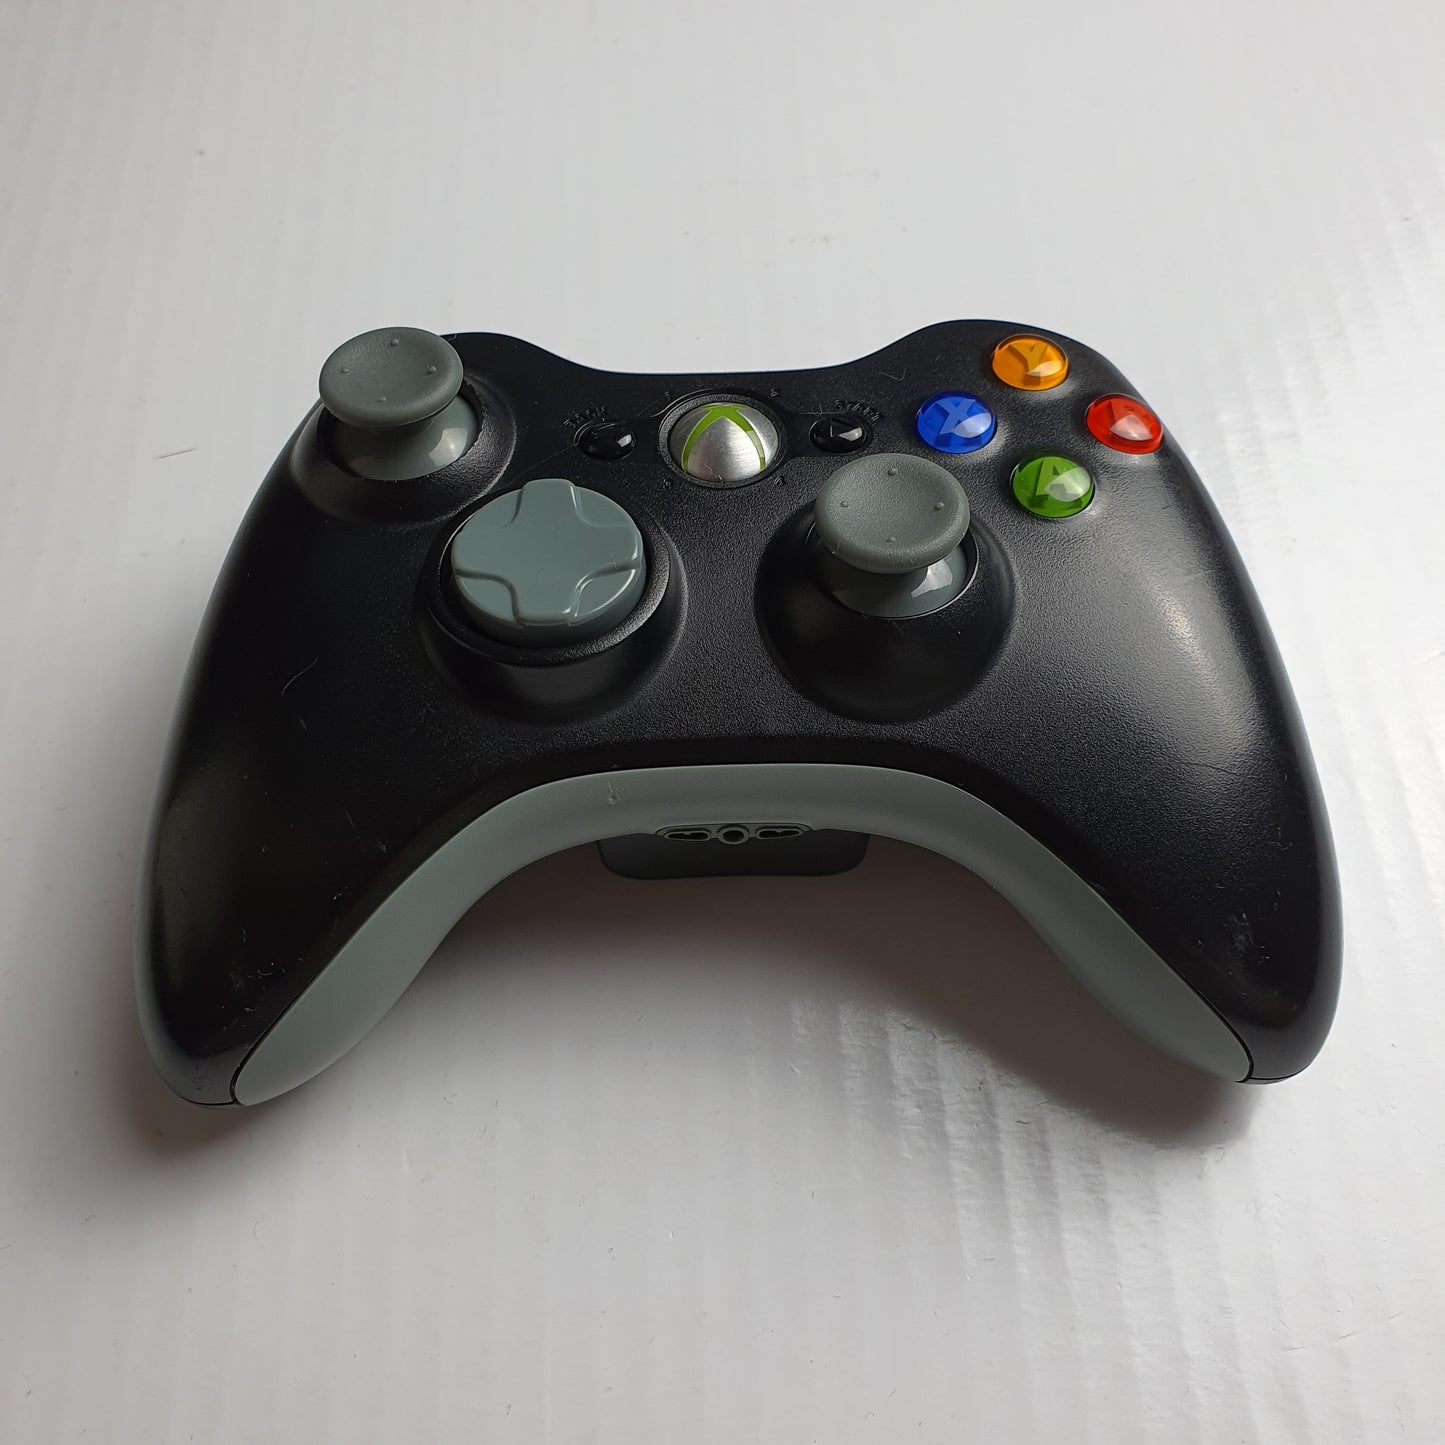 Official Microsoft Xbox 360 Wireless Black Controller